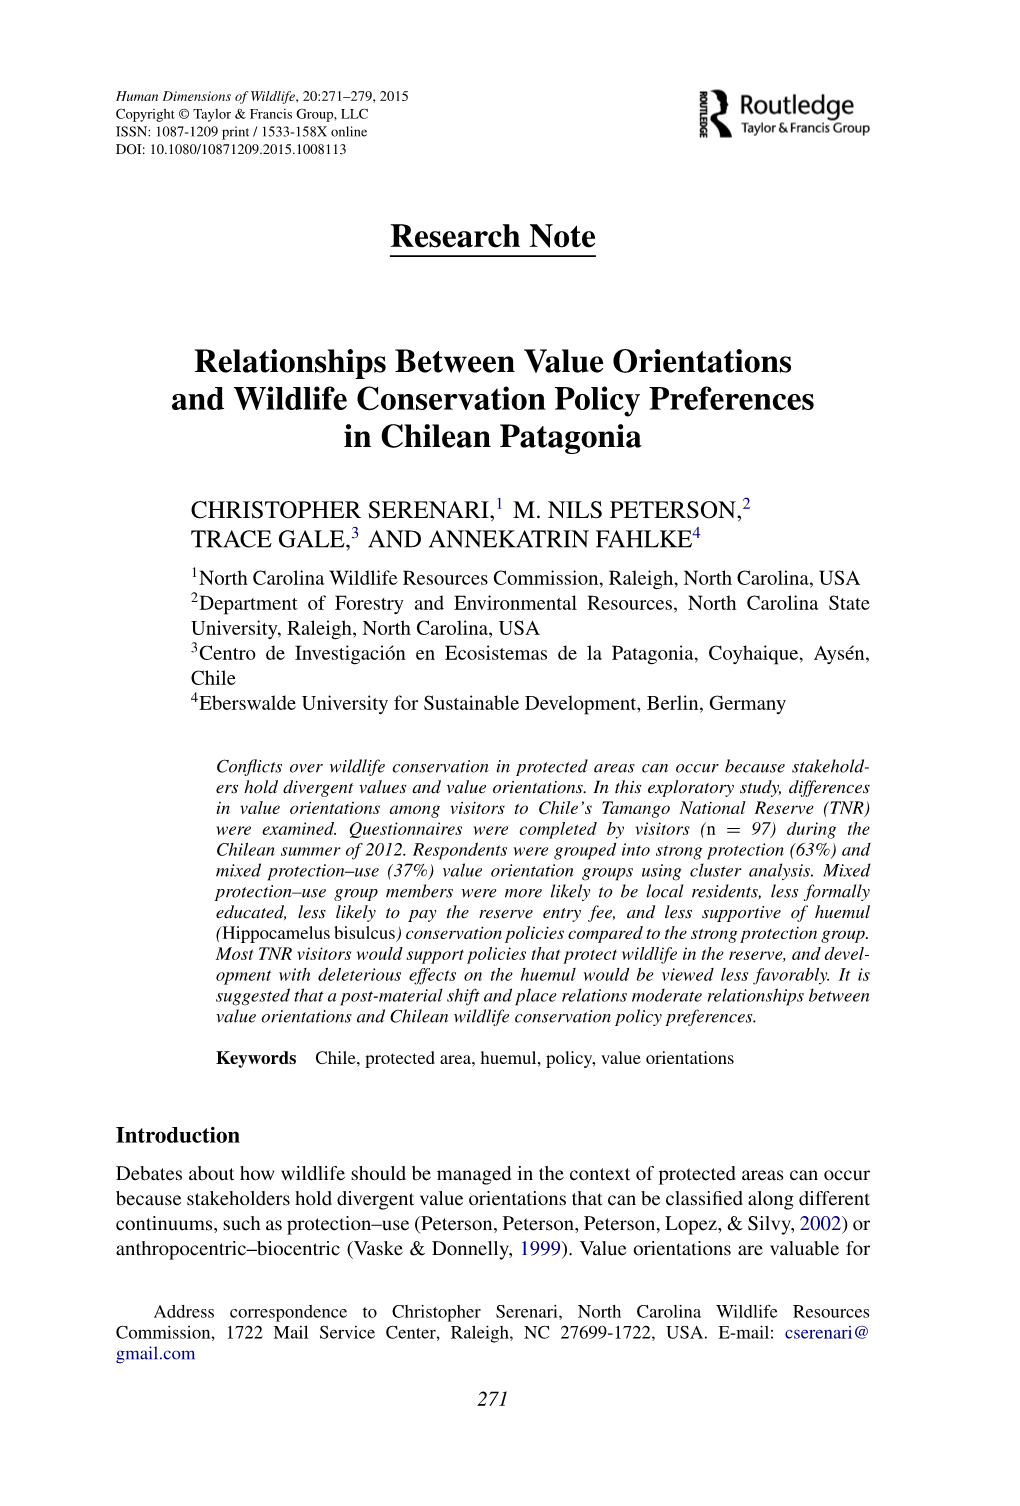 Research Note Relationships Between Value Orientations And